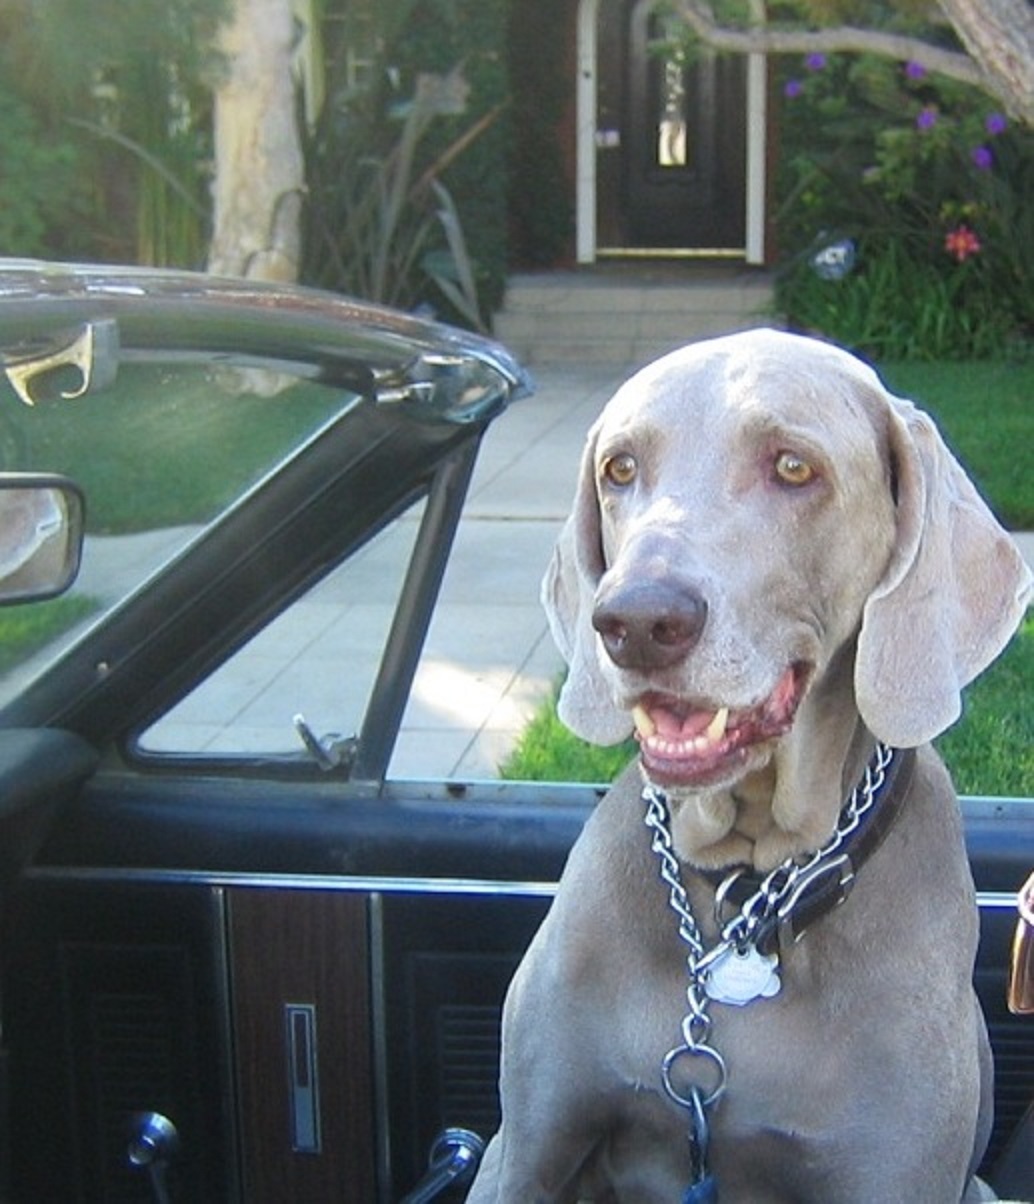 Yeager always rode in the passenger seat beside me, secured with a restraint. I never took any casual risks. I'd seen an unleashed dog dash onto Melrose Avenue once - and suffer the consequence of his human companion's hubris that it safe to do so.